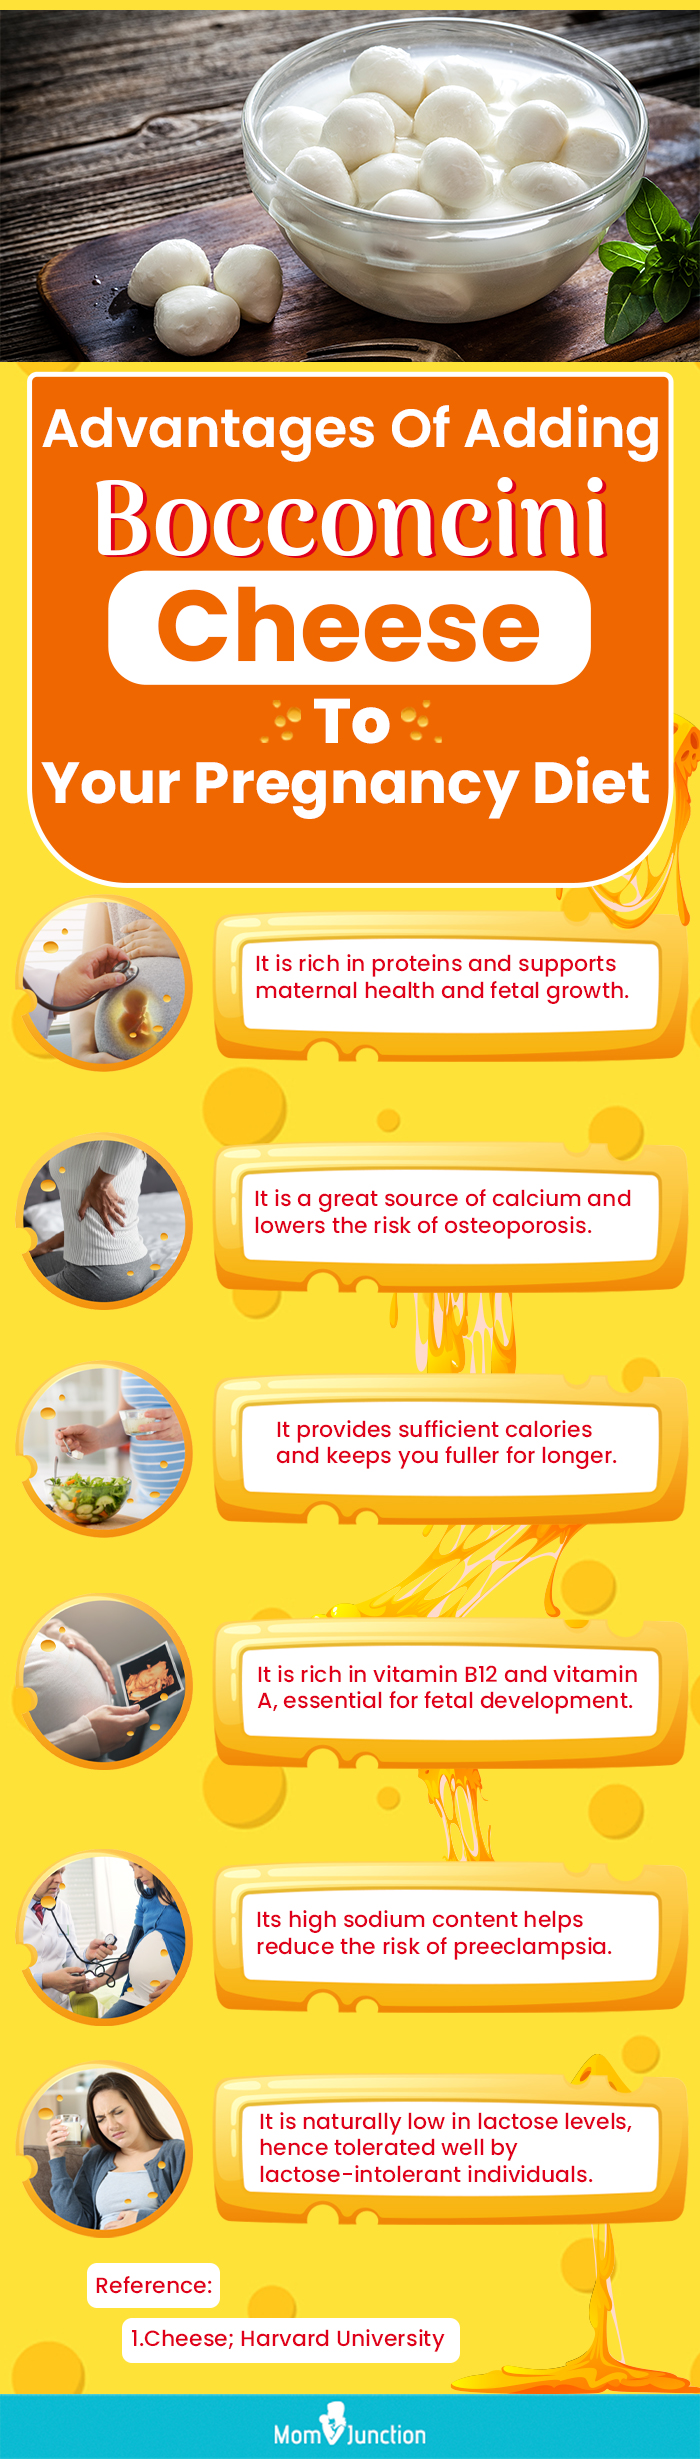 advantages of adding bocconcini cheese to your pregnancy diet (infographic)